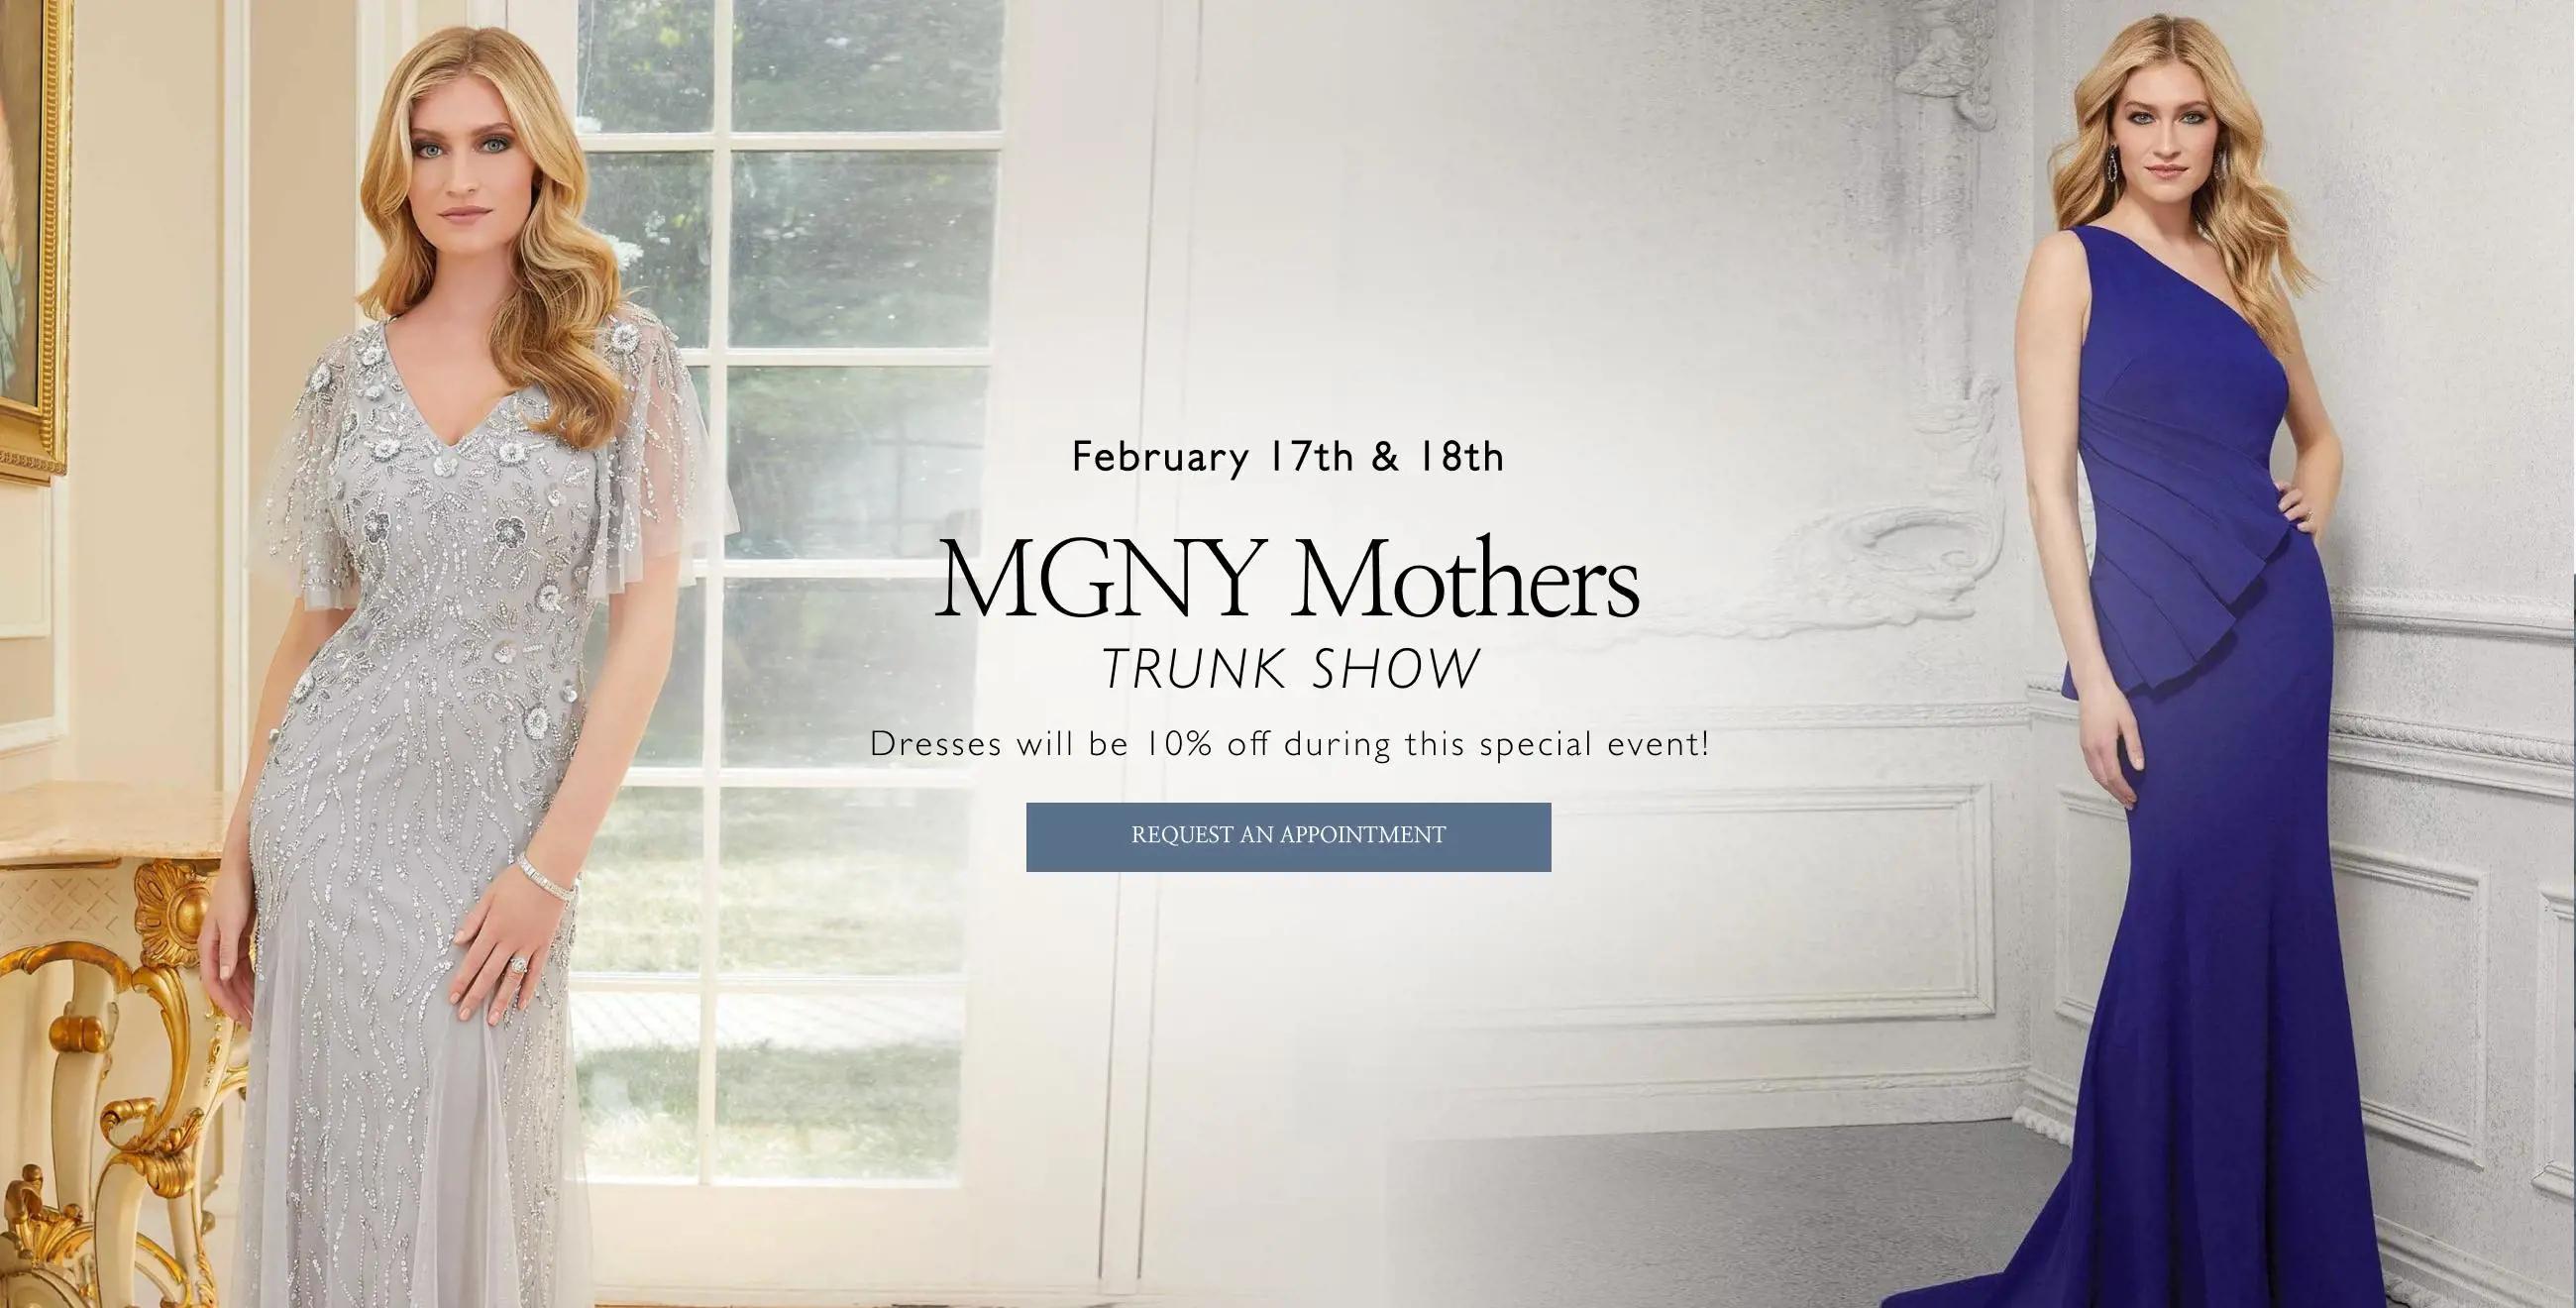 MGNY Mothers Trunk Show at The Something Blue Shoppe in AL